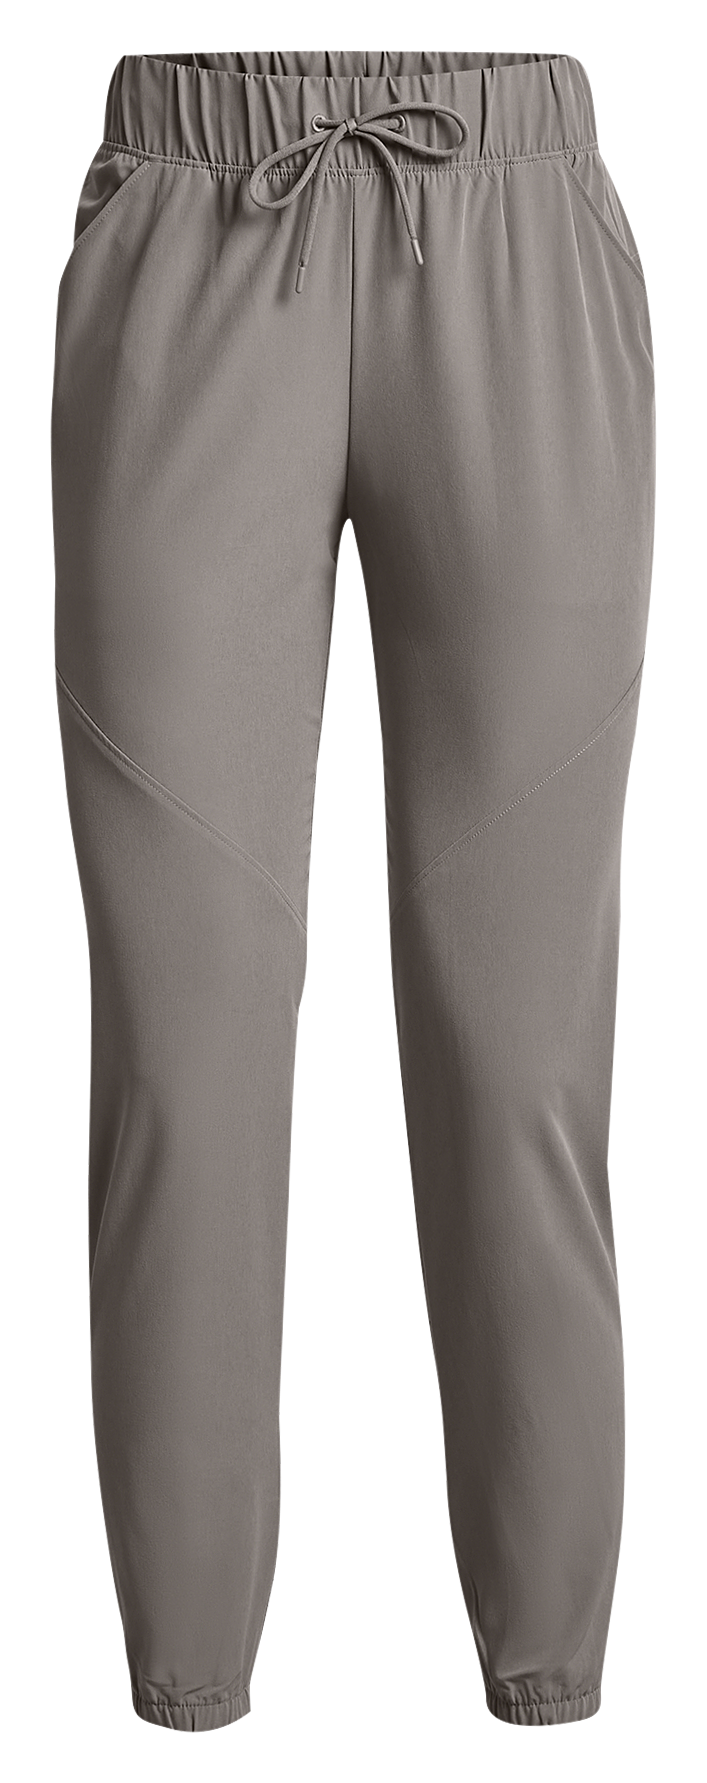 Under Armour Fusion Pants for Ladies - Pewter/Ash Taupe - XL